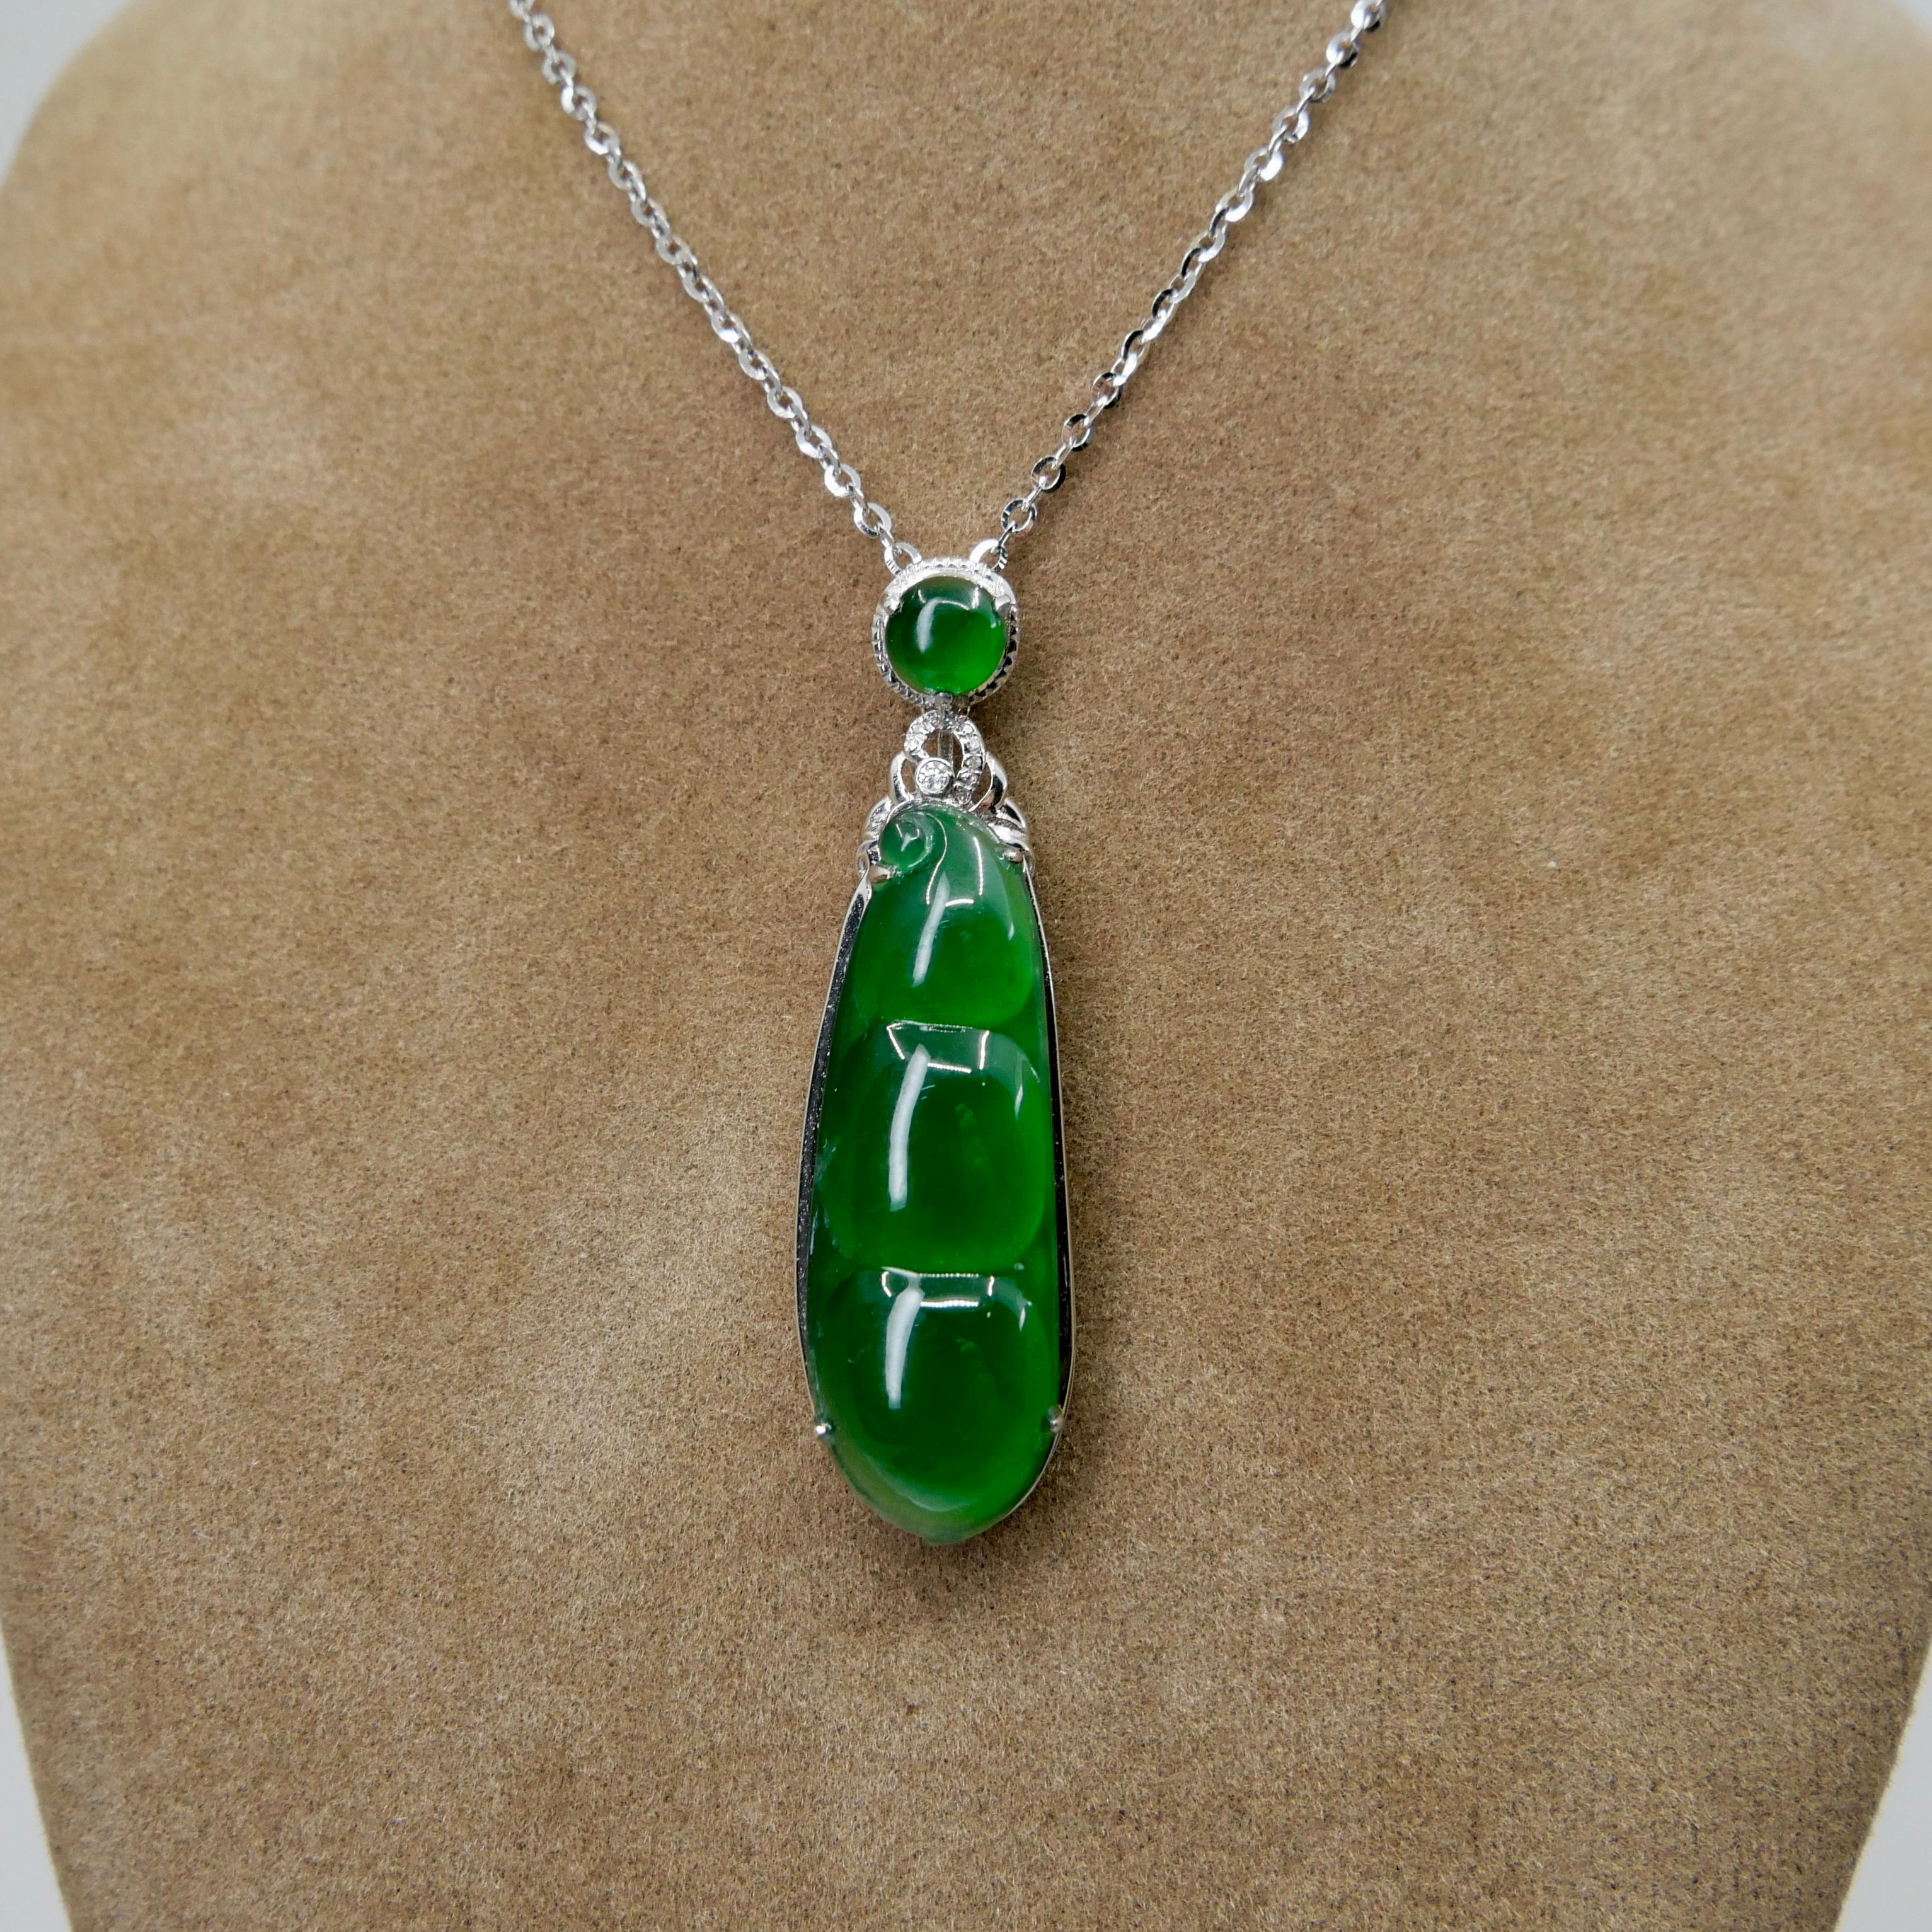 Women's Certified Imperial Jade Peapod & Diamond Pendant Necklace. Collector's Item. For Sale